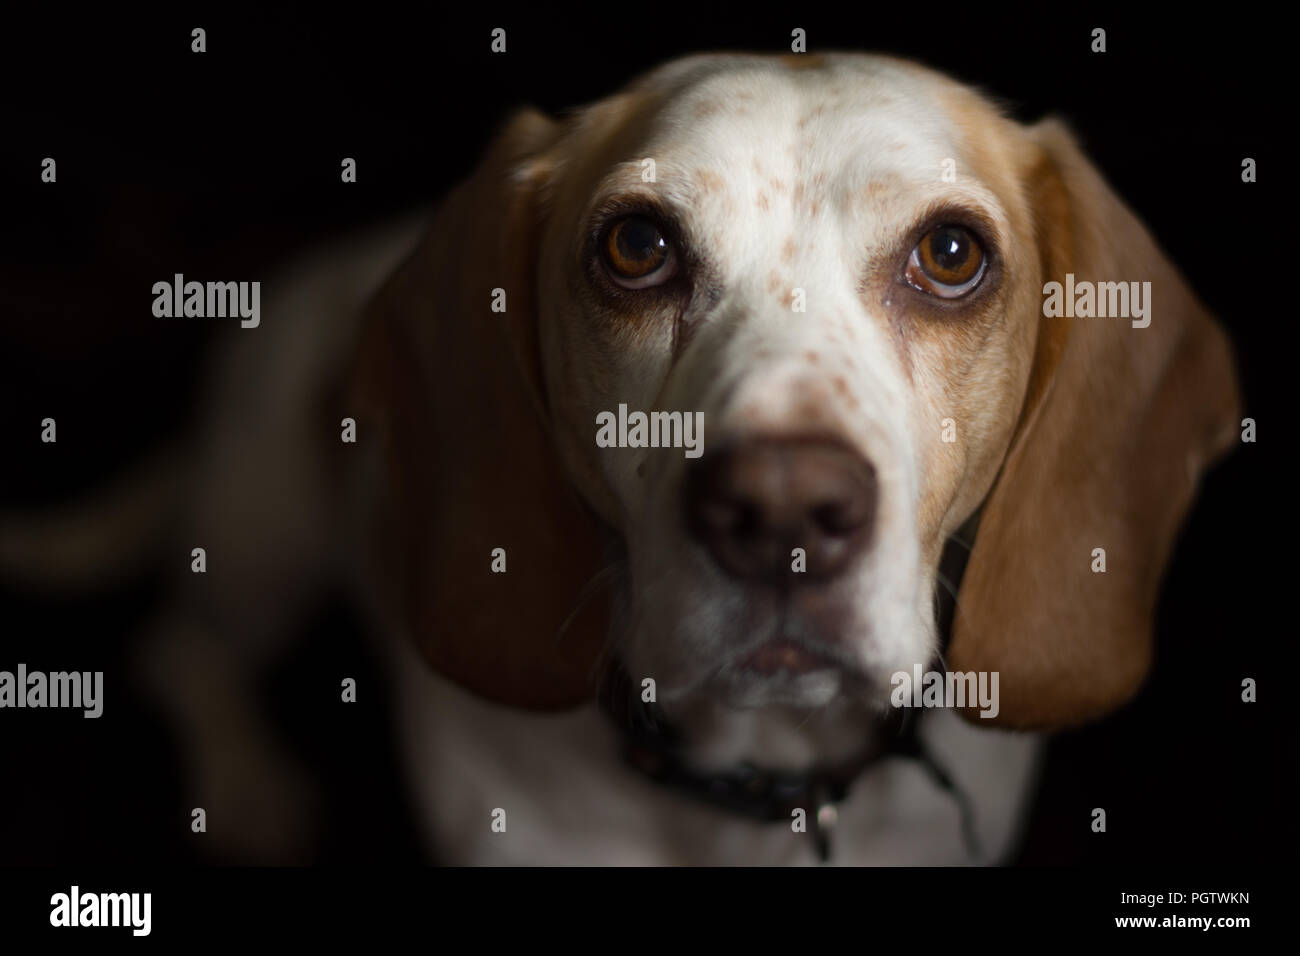 White and tan meduim sized dog with big brown eyes sitting in front of a black back ground Stock Photo